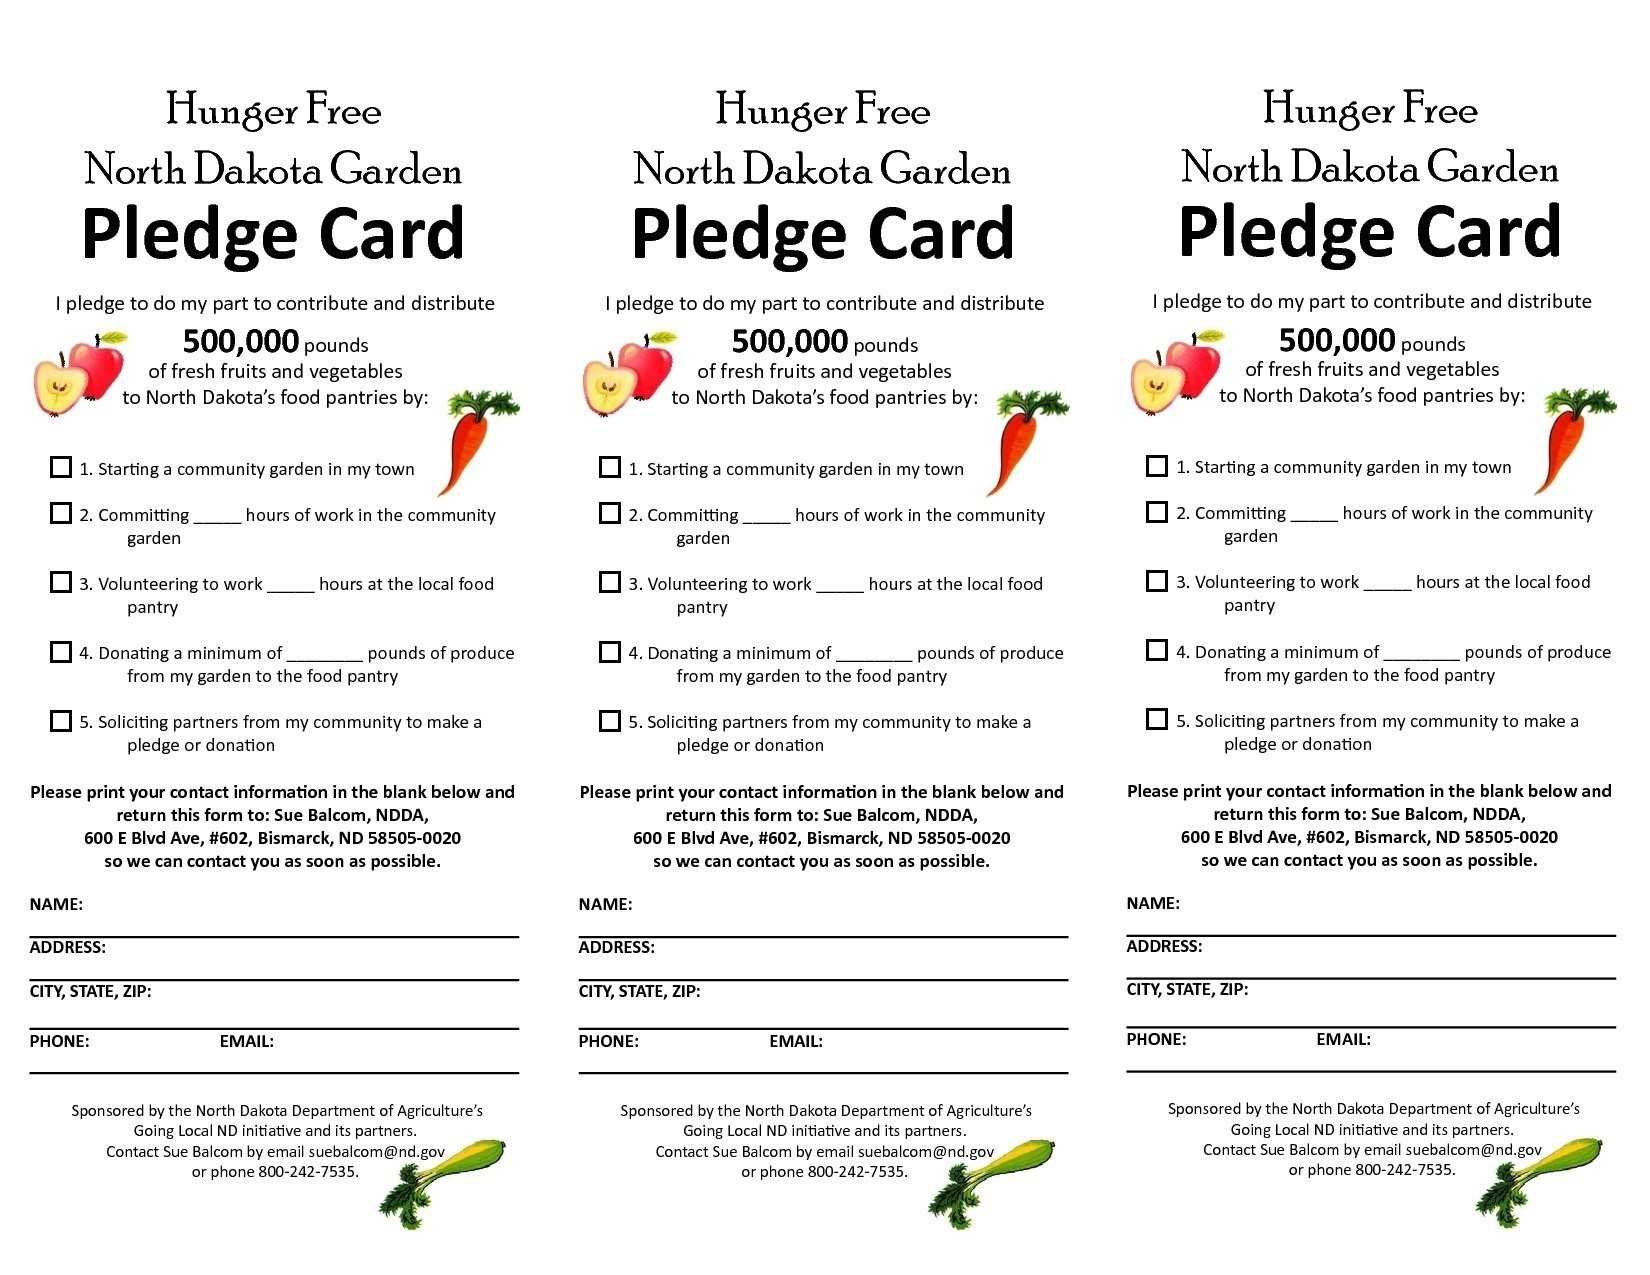 Pledge Cards Template Fundraising Card Certificate Images In Building Fund Pledge Card Template